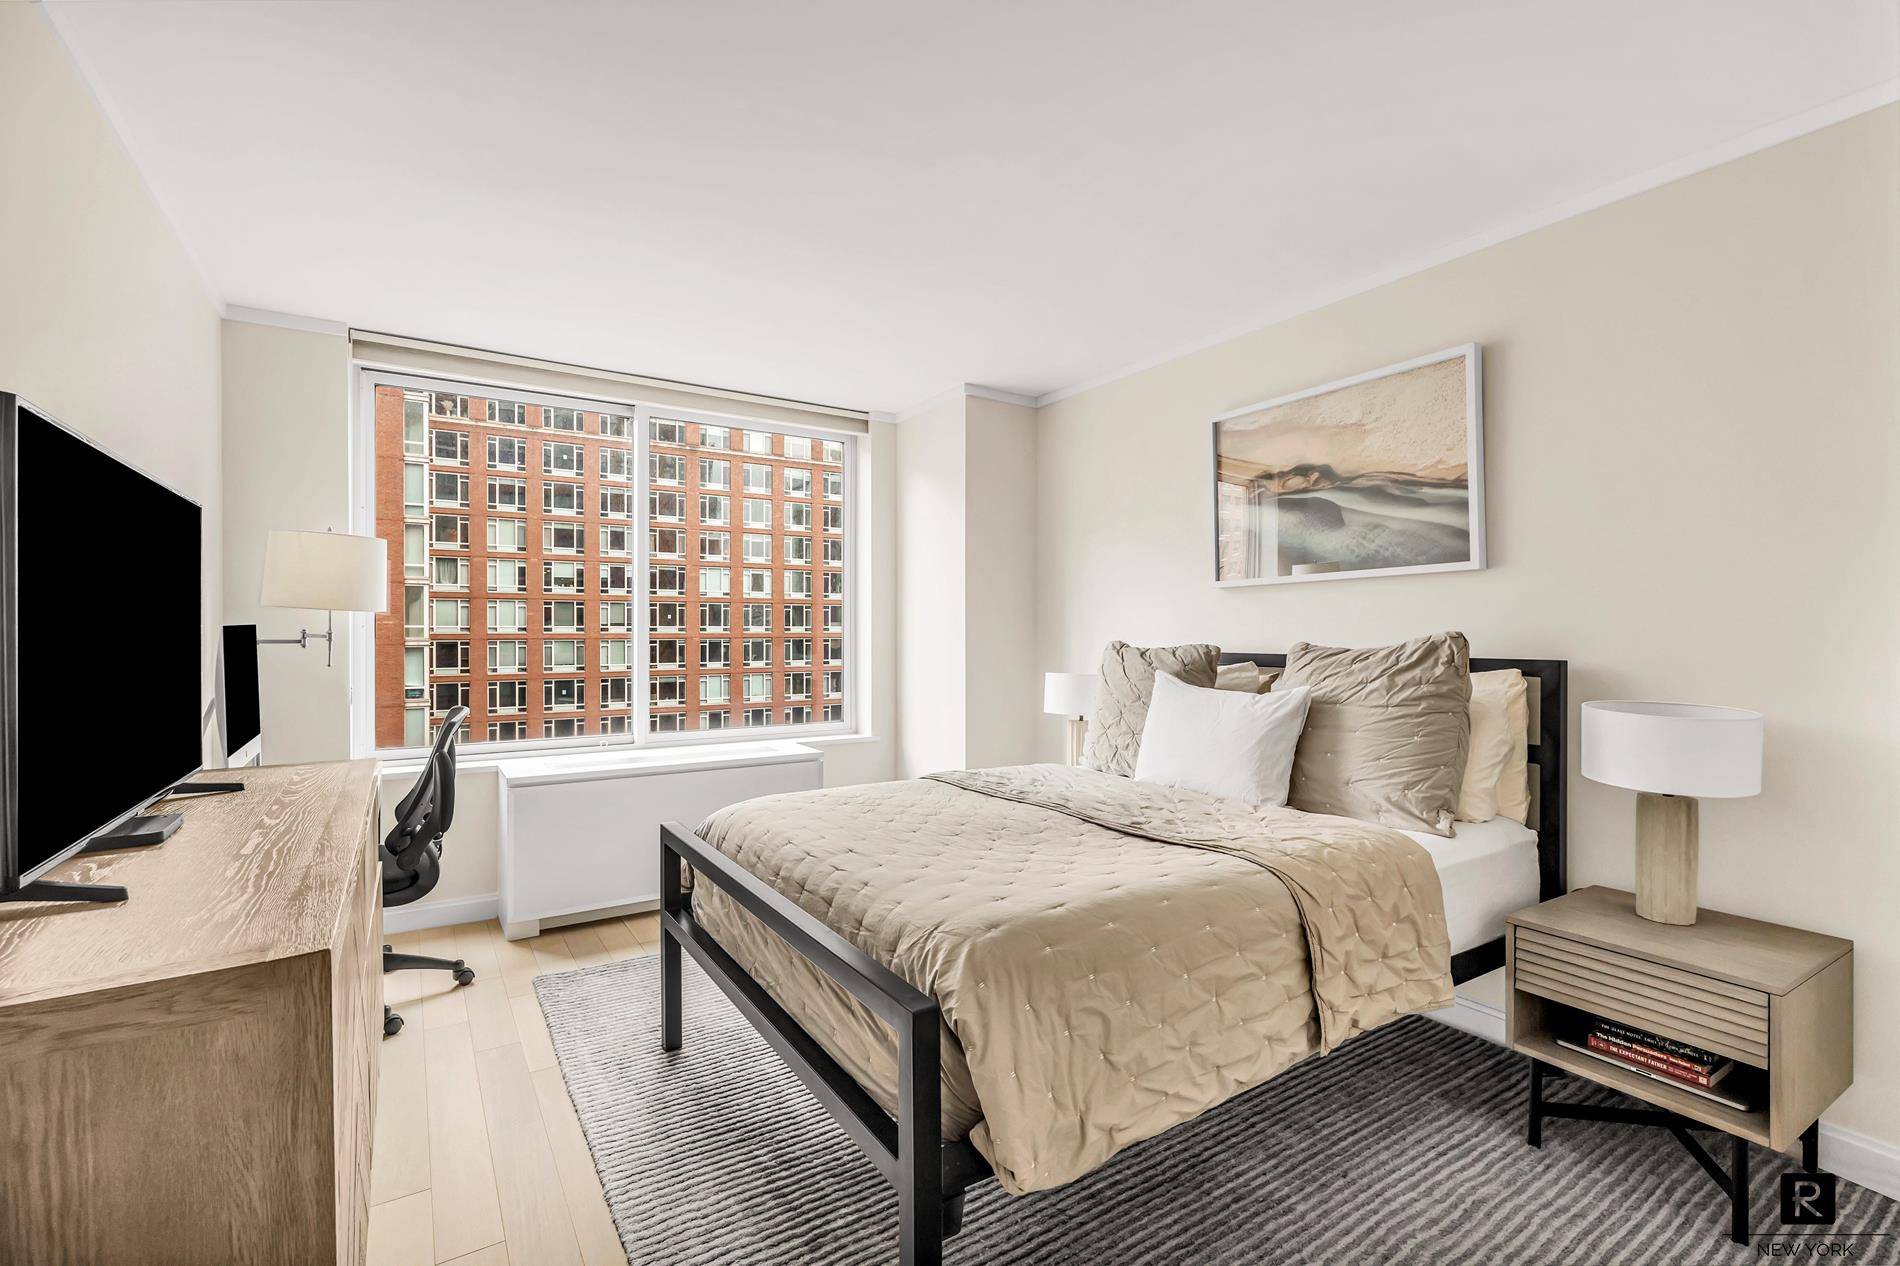 Welcome home to this quintessential split 2 bedroom 2 bathroom apartment in 212 Warren St, one of only two true condominiums located in North Battery Park West TriBeCa.